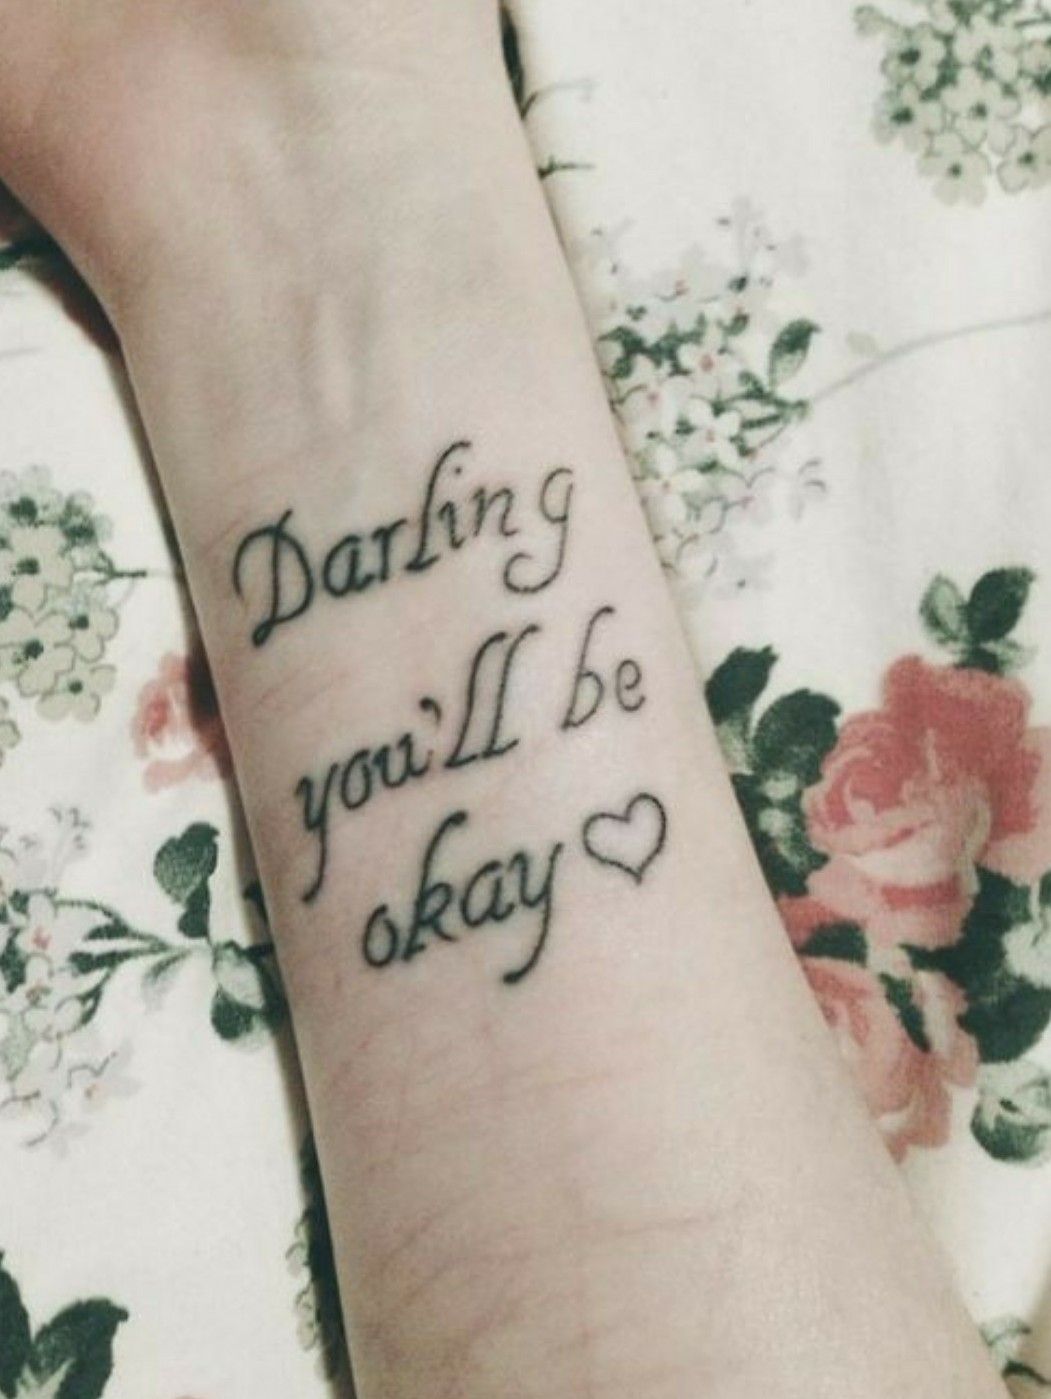 Darling Youll Be Okay Tattoo by EmiliaSteilsson on DeviantArt